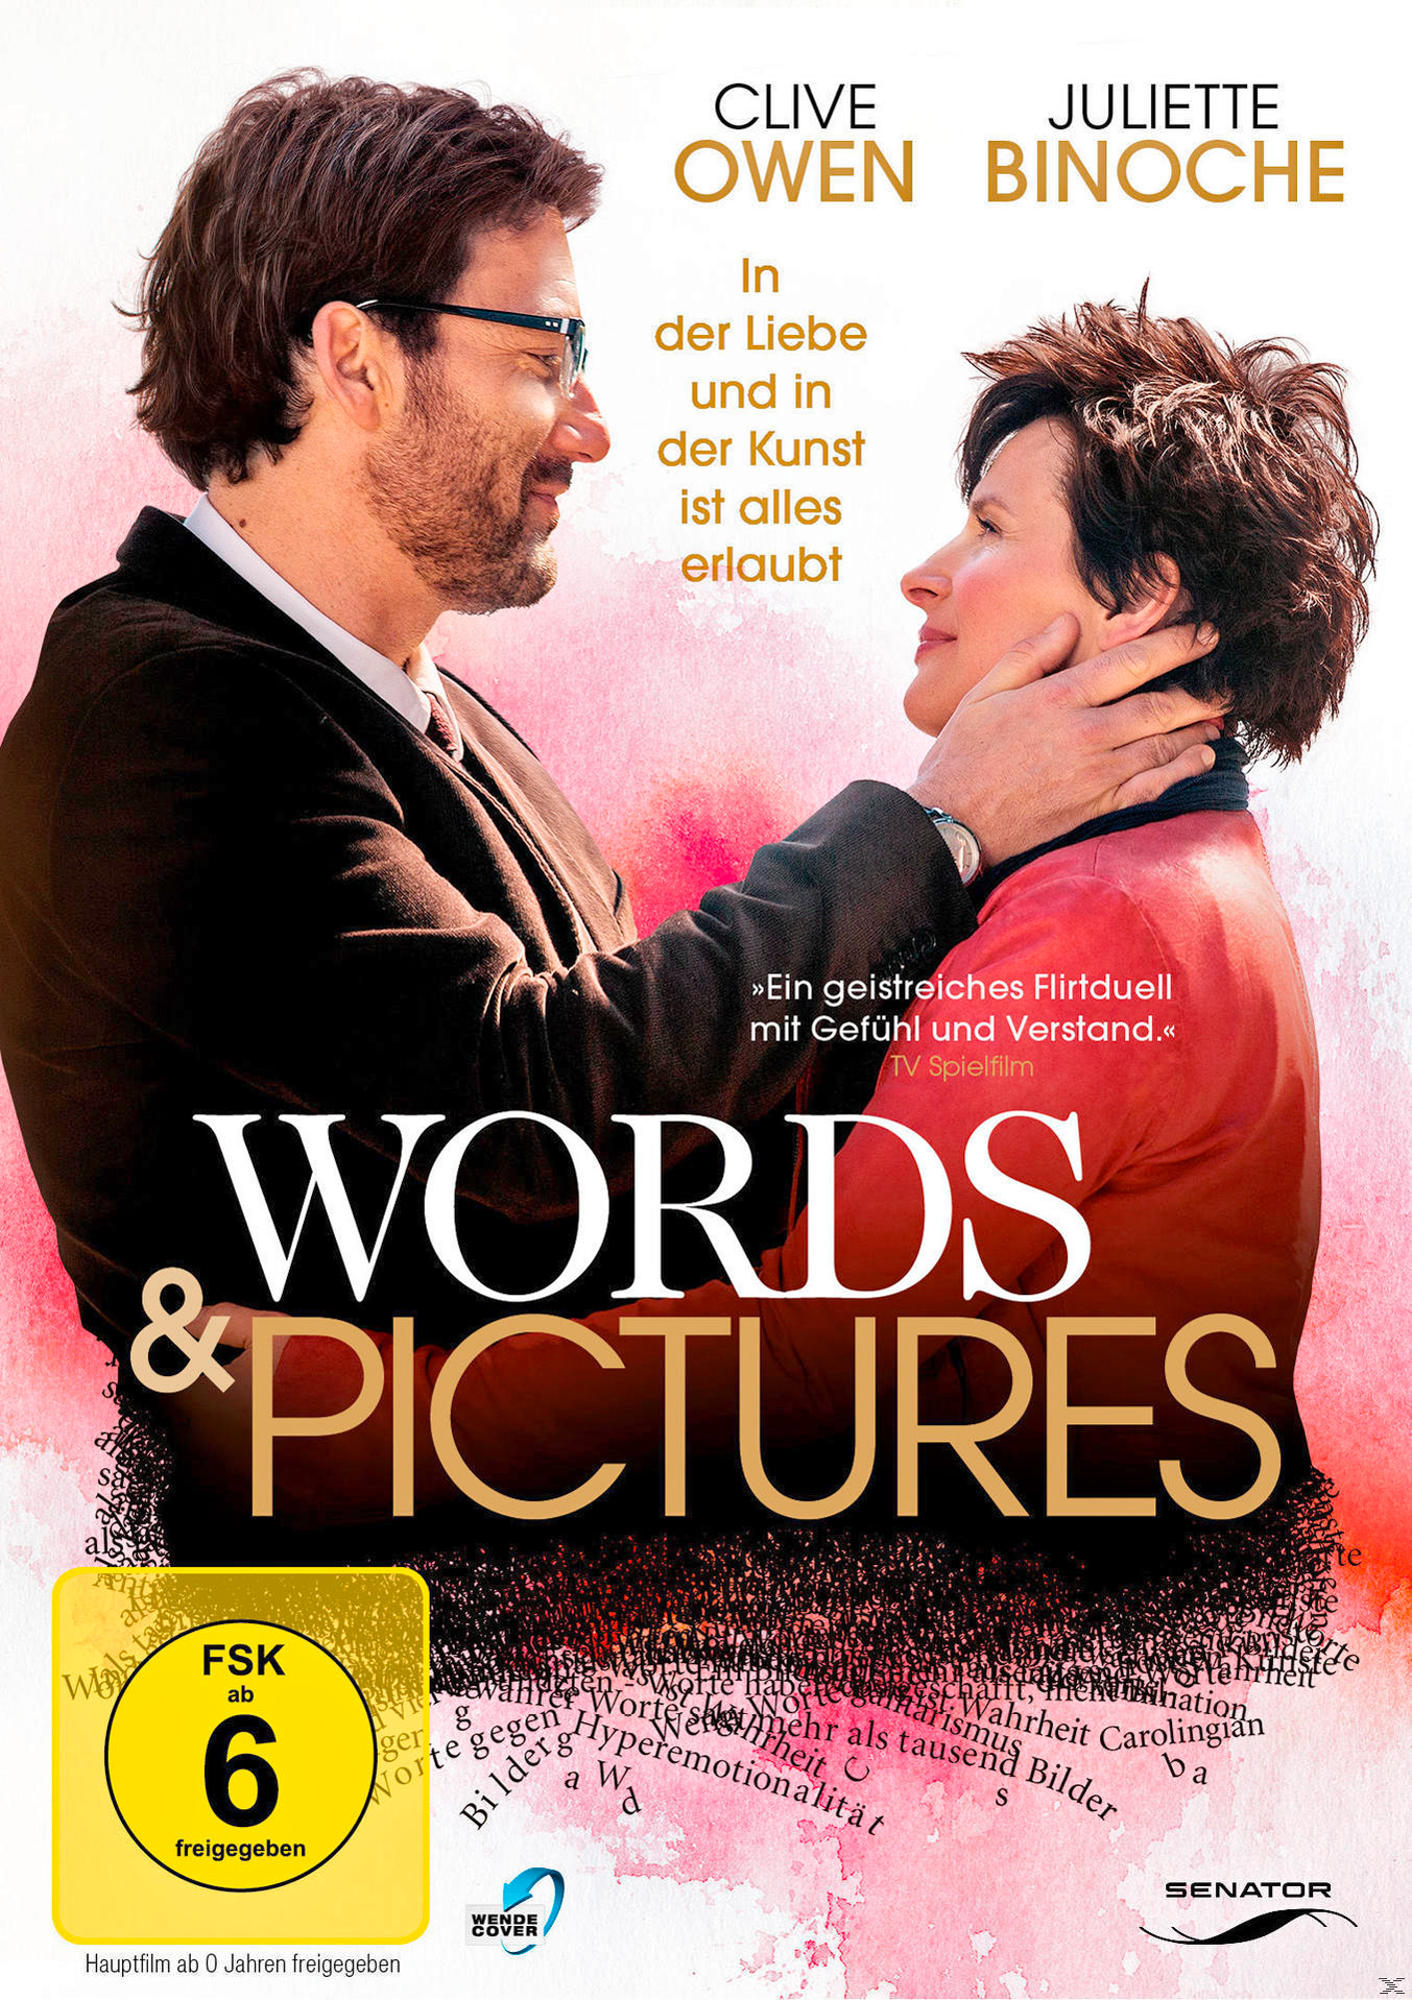 DVD WORDS PICTURES AND